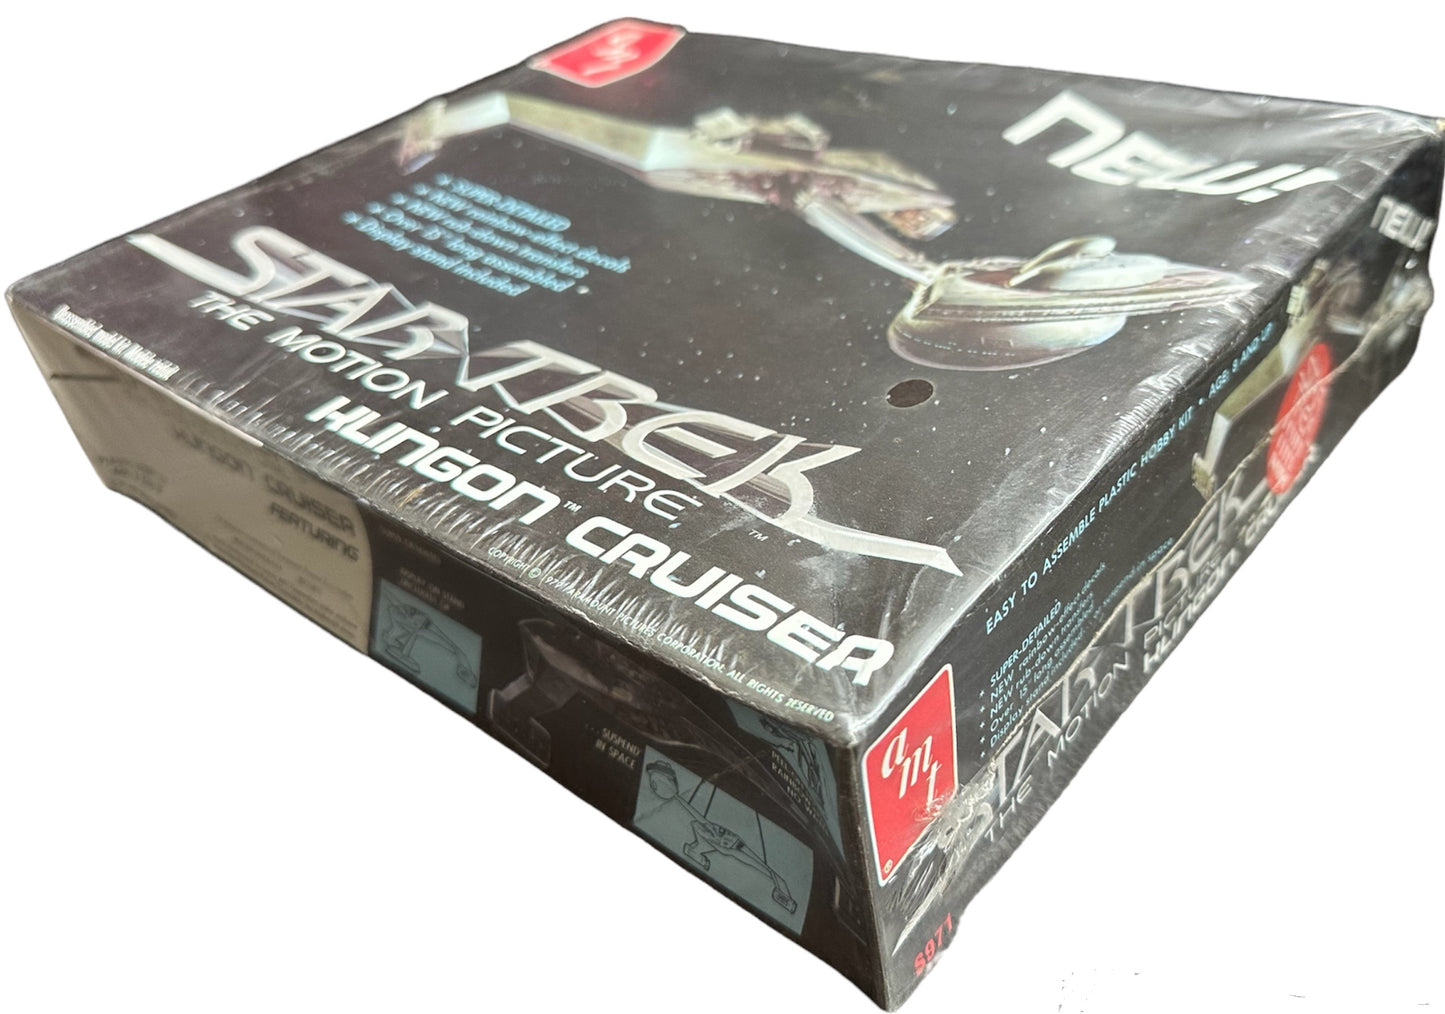 Vintage AMT/Matchbox 1979 Star Trek The Motion Picture The Klingon Cruiser Super Detailed Model Kit With Display Stand Kit No. S971 - Factory Sealed Shop Stock Room Find